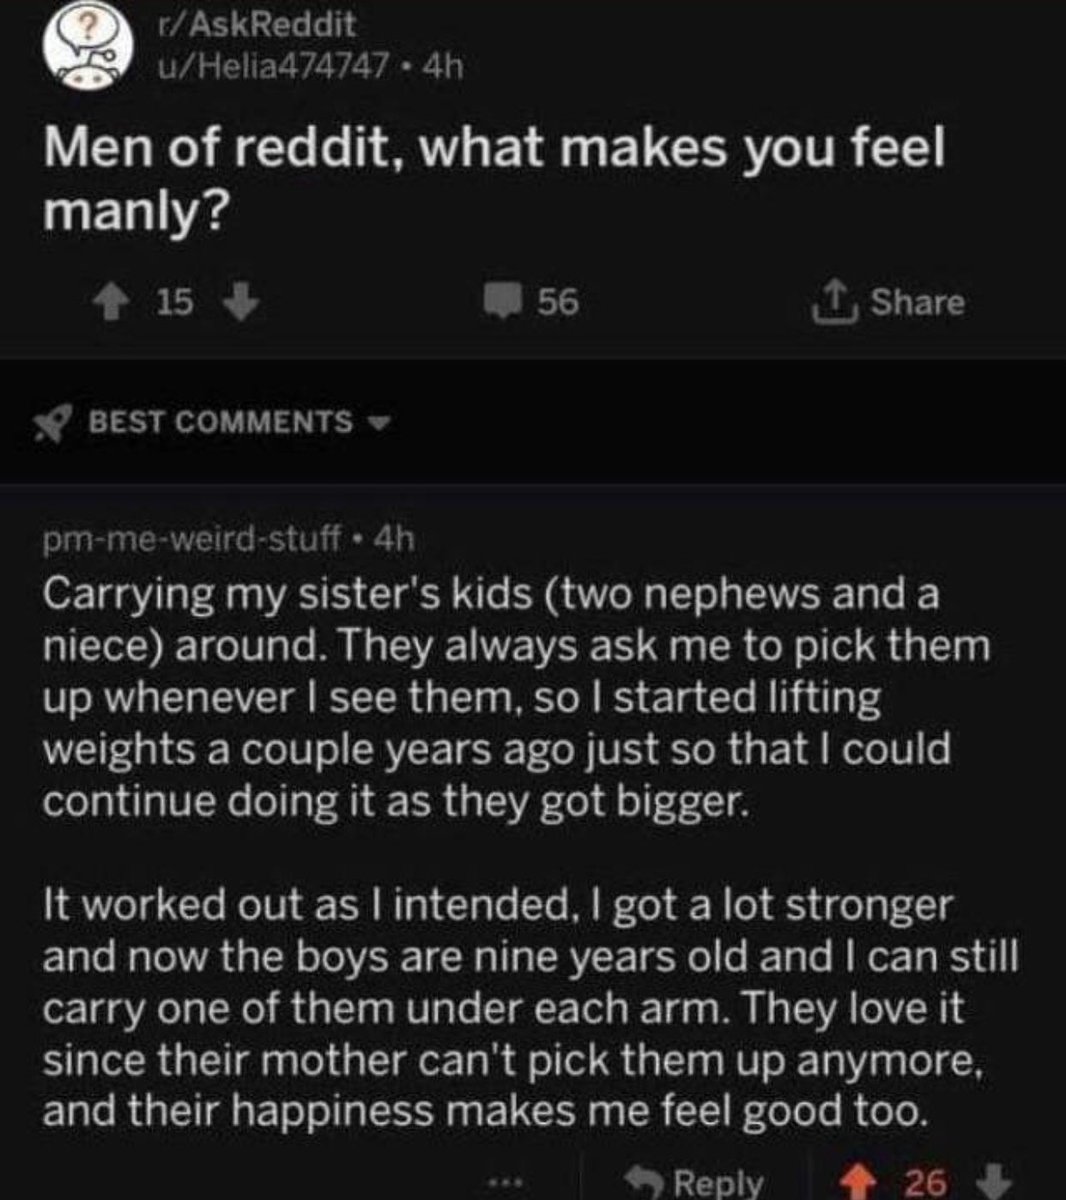 Dudes posting their wins - my sister loves me reddit - rAskReddit uHelia474747.4h Men of reddit, what makes you feel manly? 15 56 Best pmmeweirdstuff 4h Carrying my sister's kids two nephews and a niece around. They always ask me to pick them up whenever 